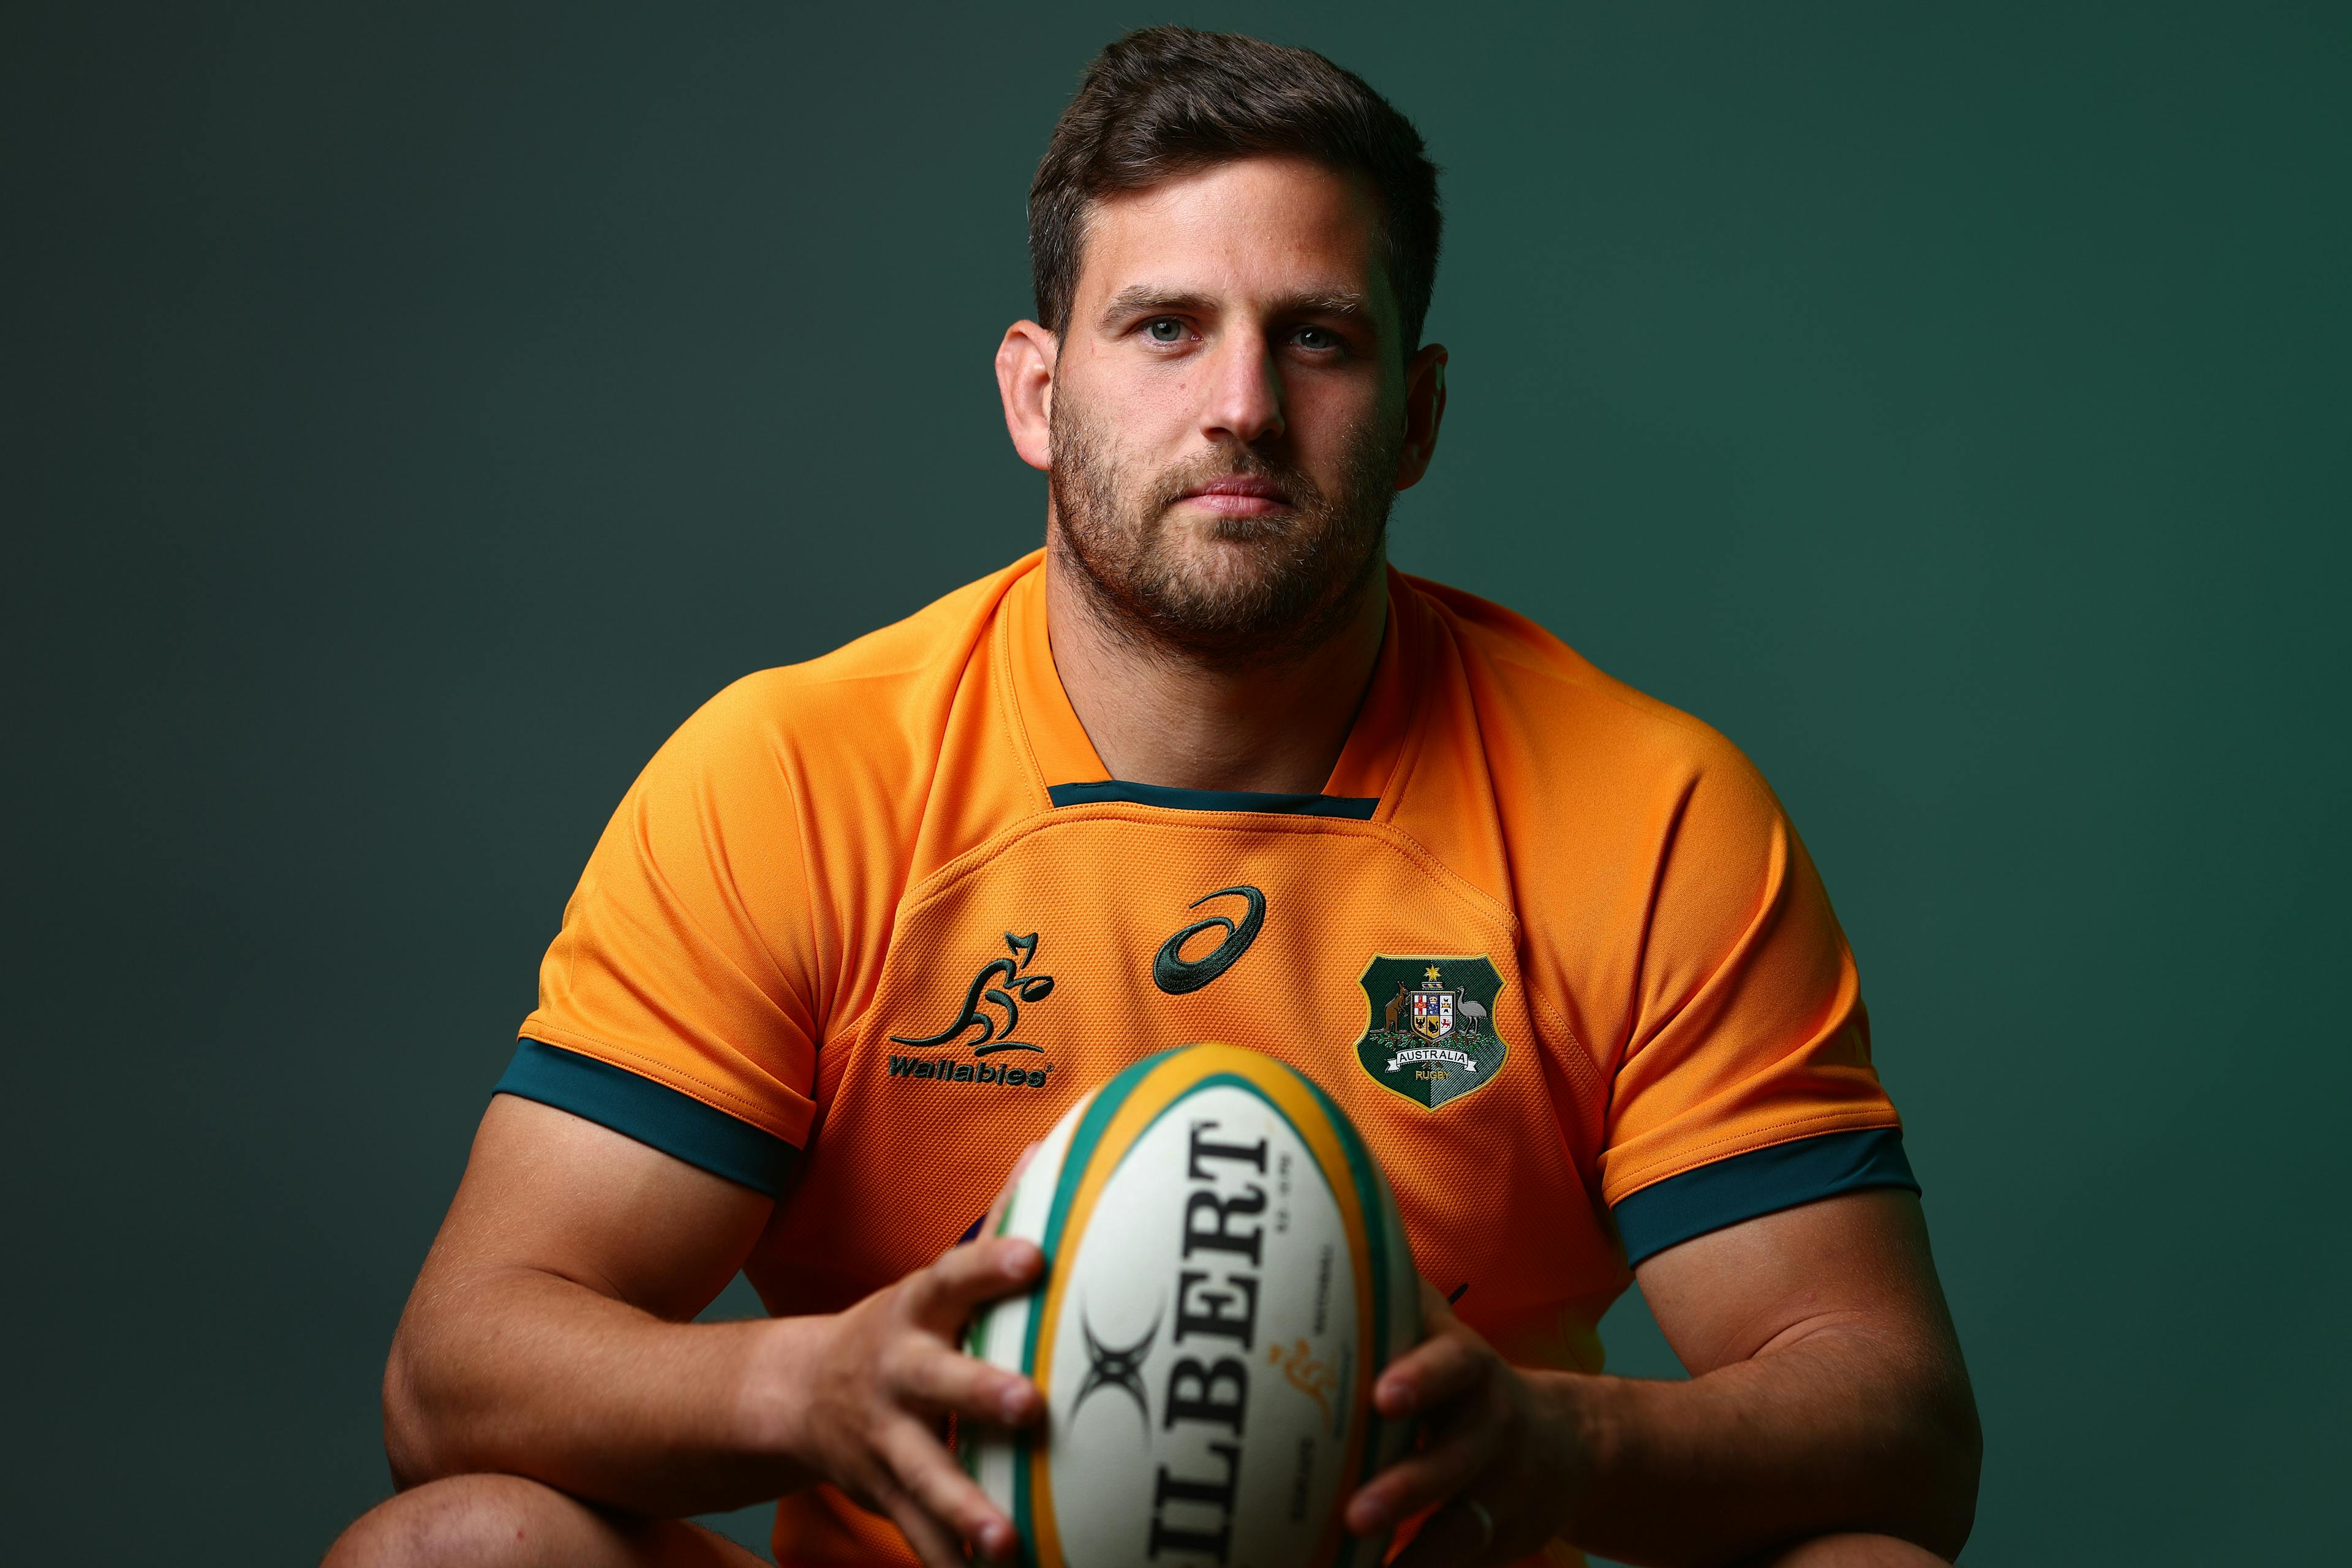 Dave Porecki will make his debut against England as the starting hooker for the Wallabies